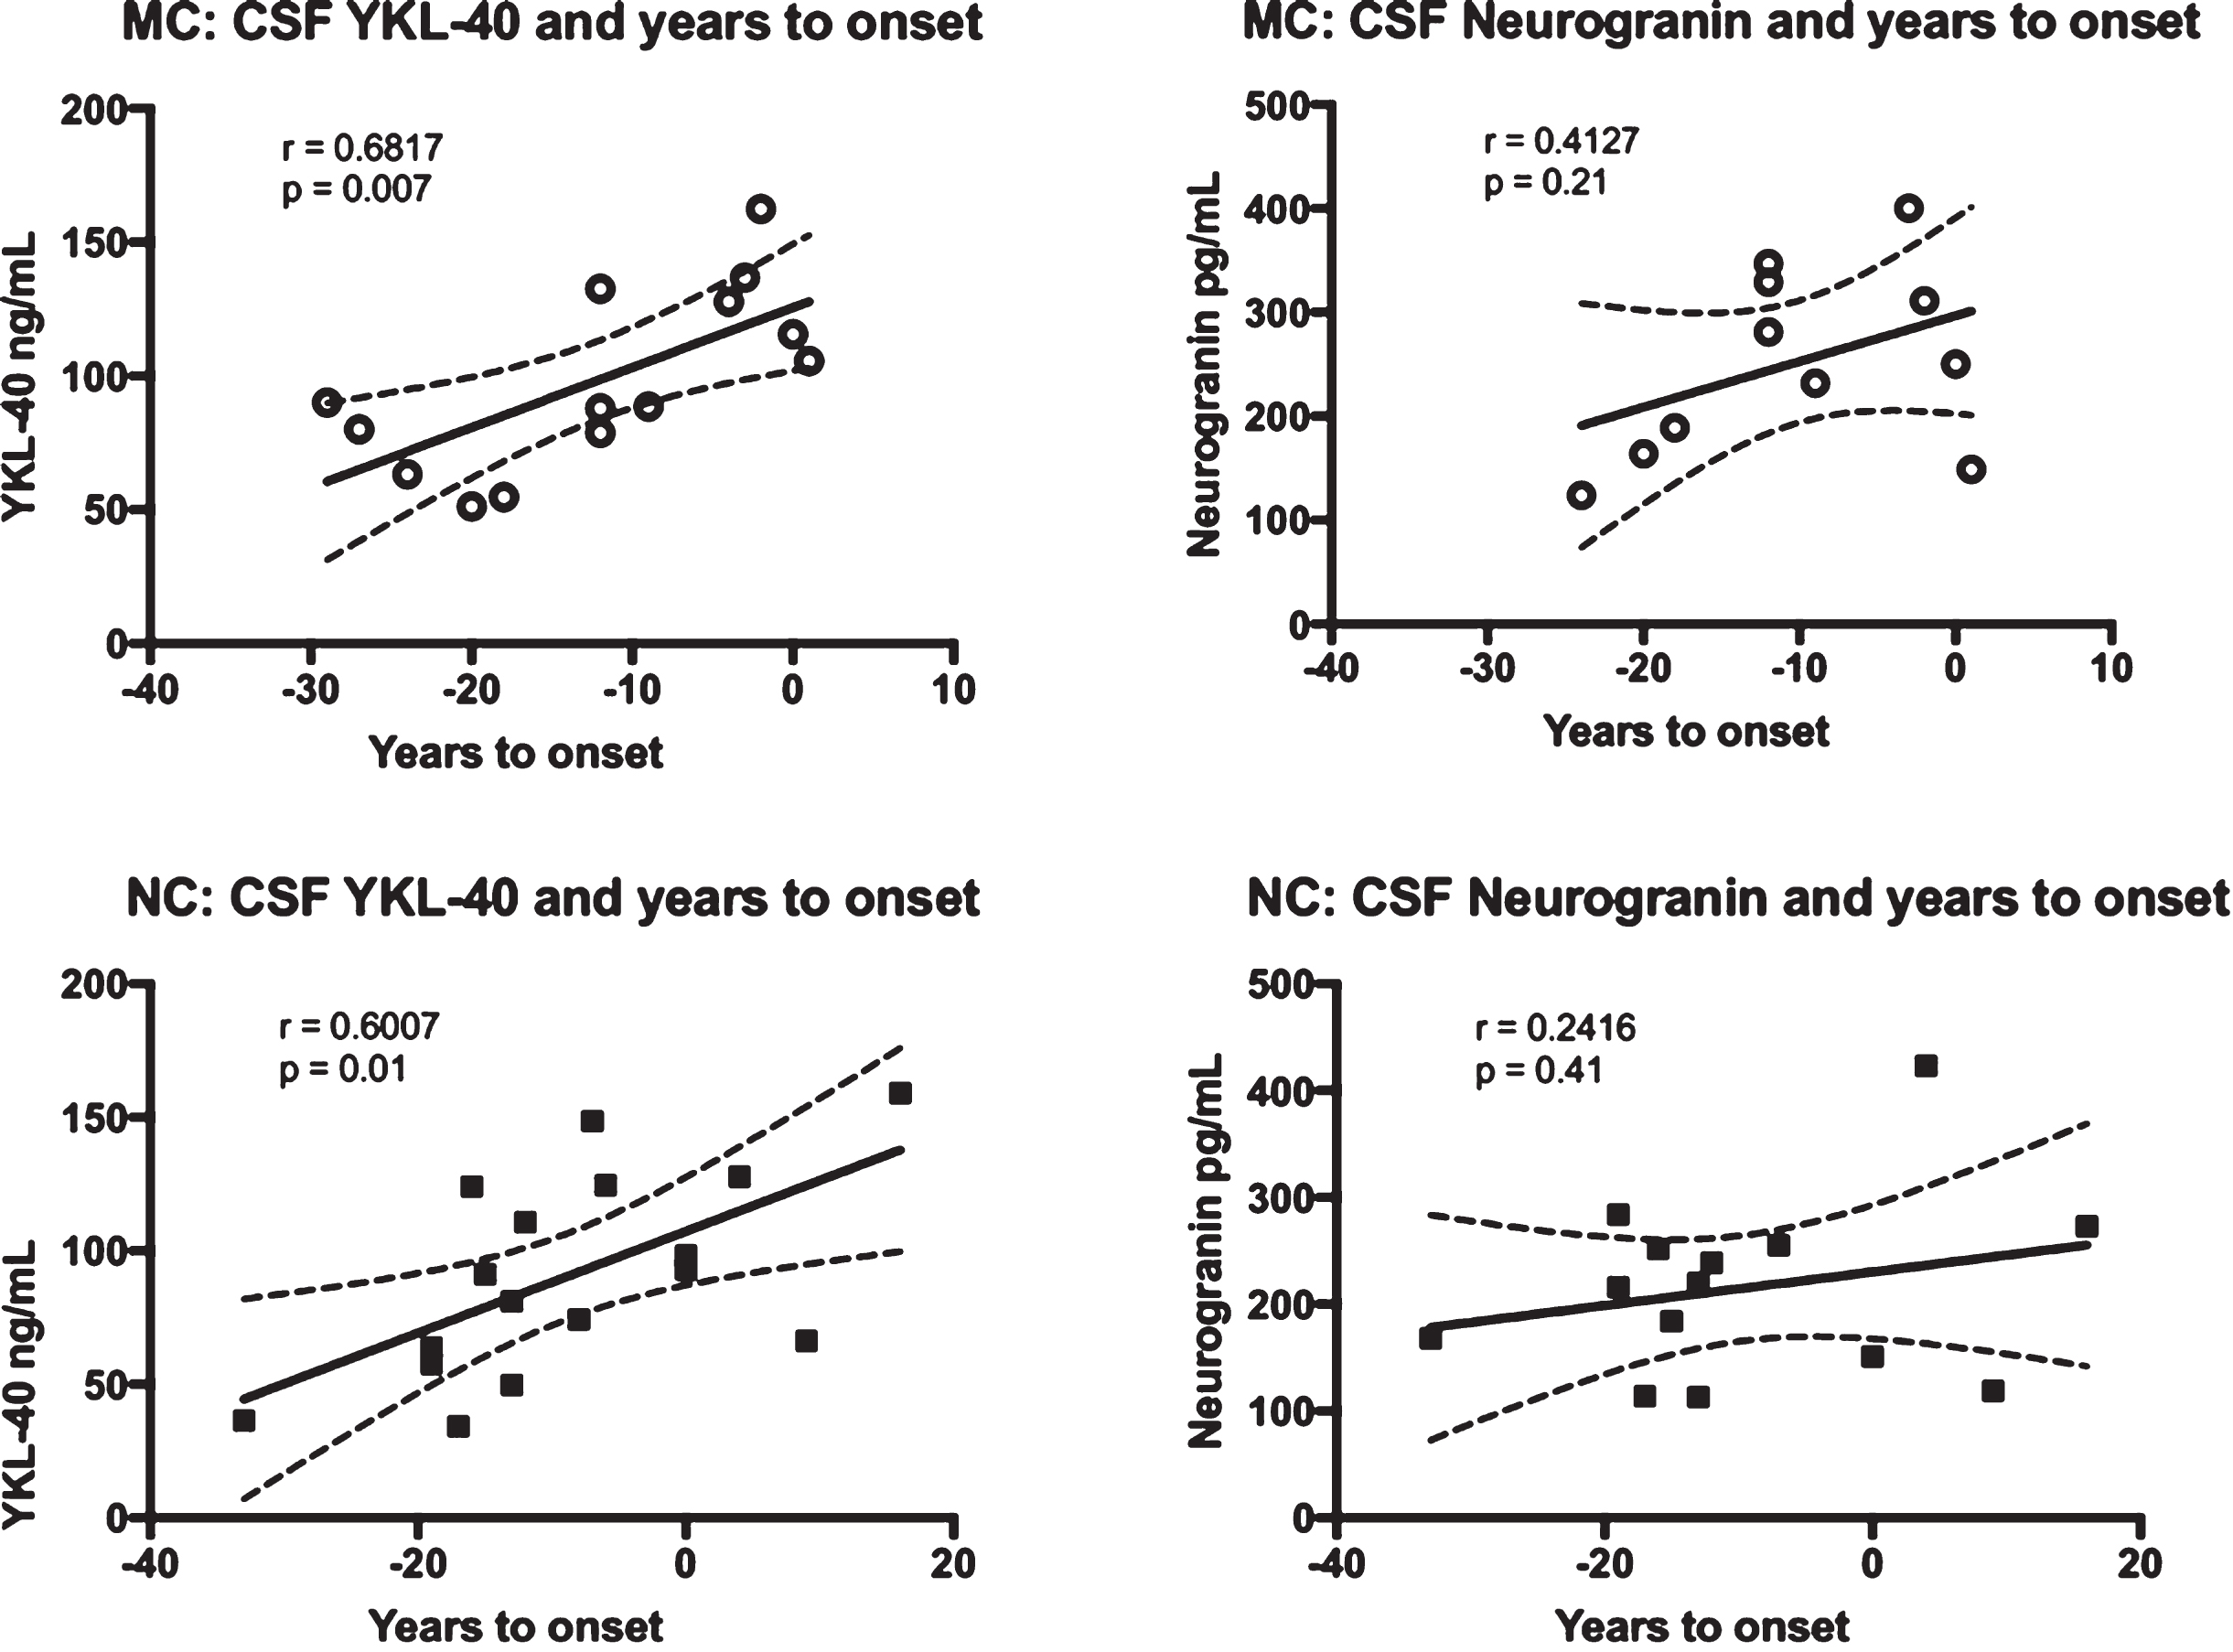 Correlations between the levels of YKL-40 and neurogranin versus expected years to symptom onset in FAD MC and NC. Correlations between CSF YKL-40, neurogranin and expected years to symptom onset in FAD MC and NC. The solid lines indicate the linear regression and the dotted lines represent the 95% confidence interval. The “r” represents the Pearson correlation coefficient. The symbols represent individual values (filled symbols NC and white symbols MC).CSF, cerebrospinal fluid; FAD, familial Alzheimer’s disease; MC, mutation carriers; NC, non-carriers.